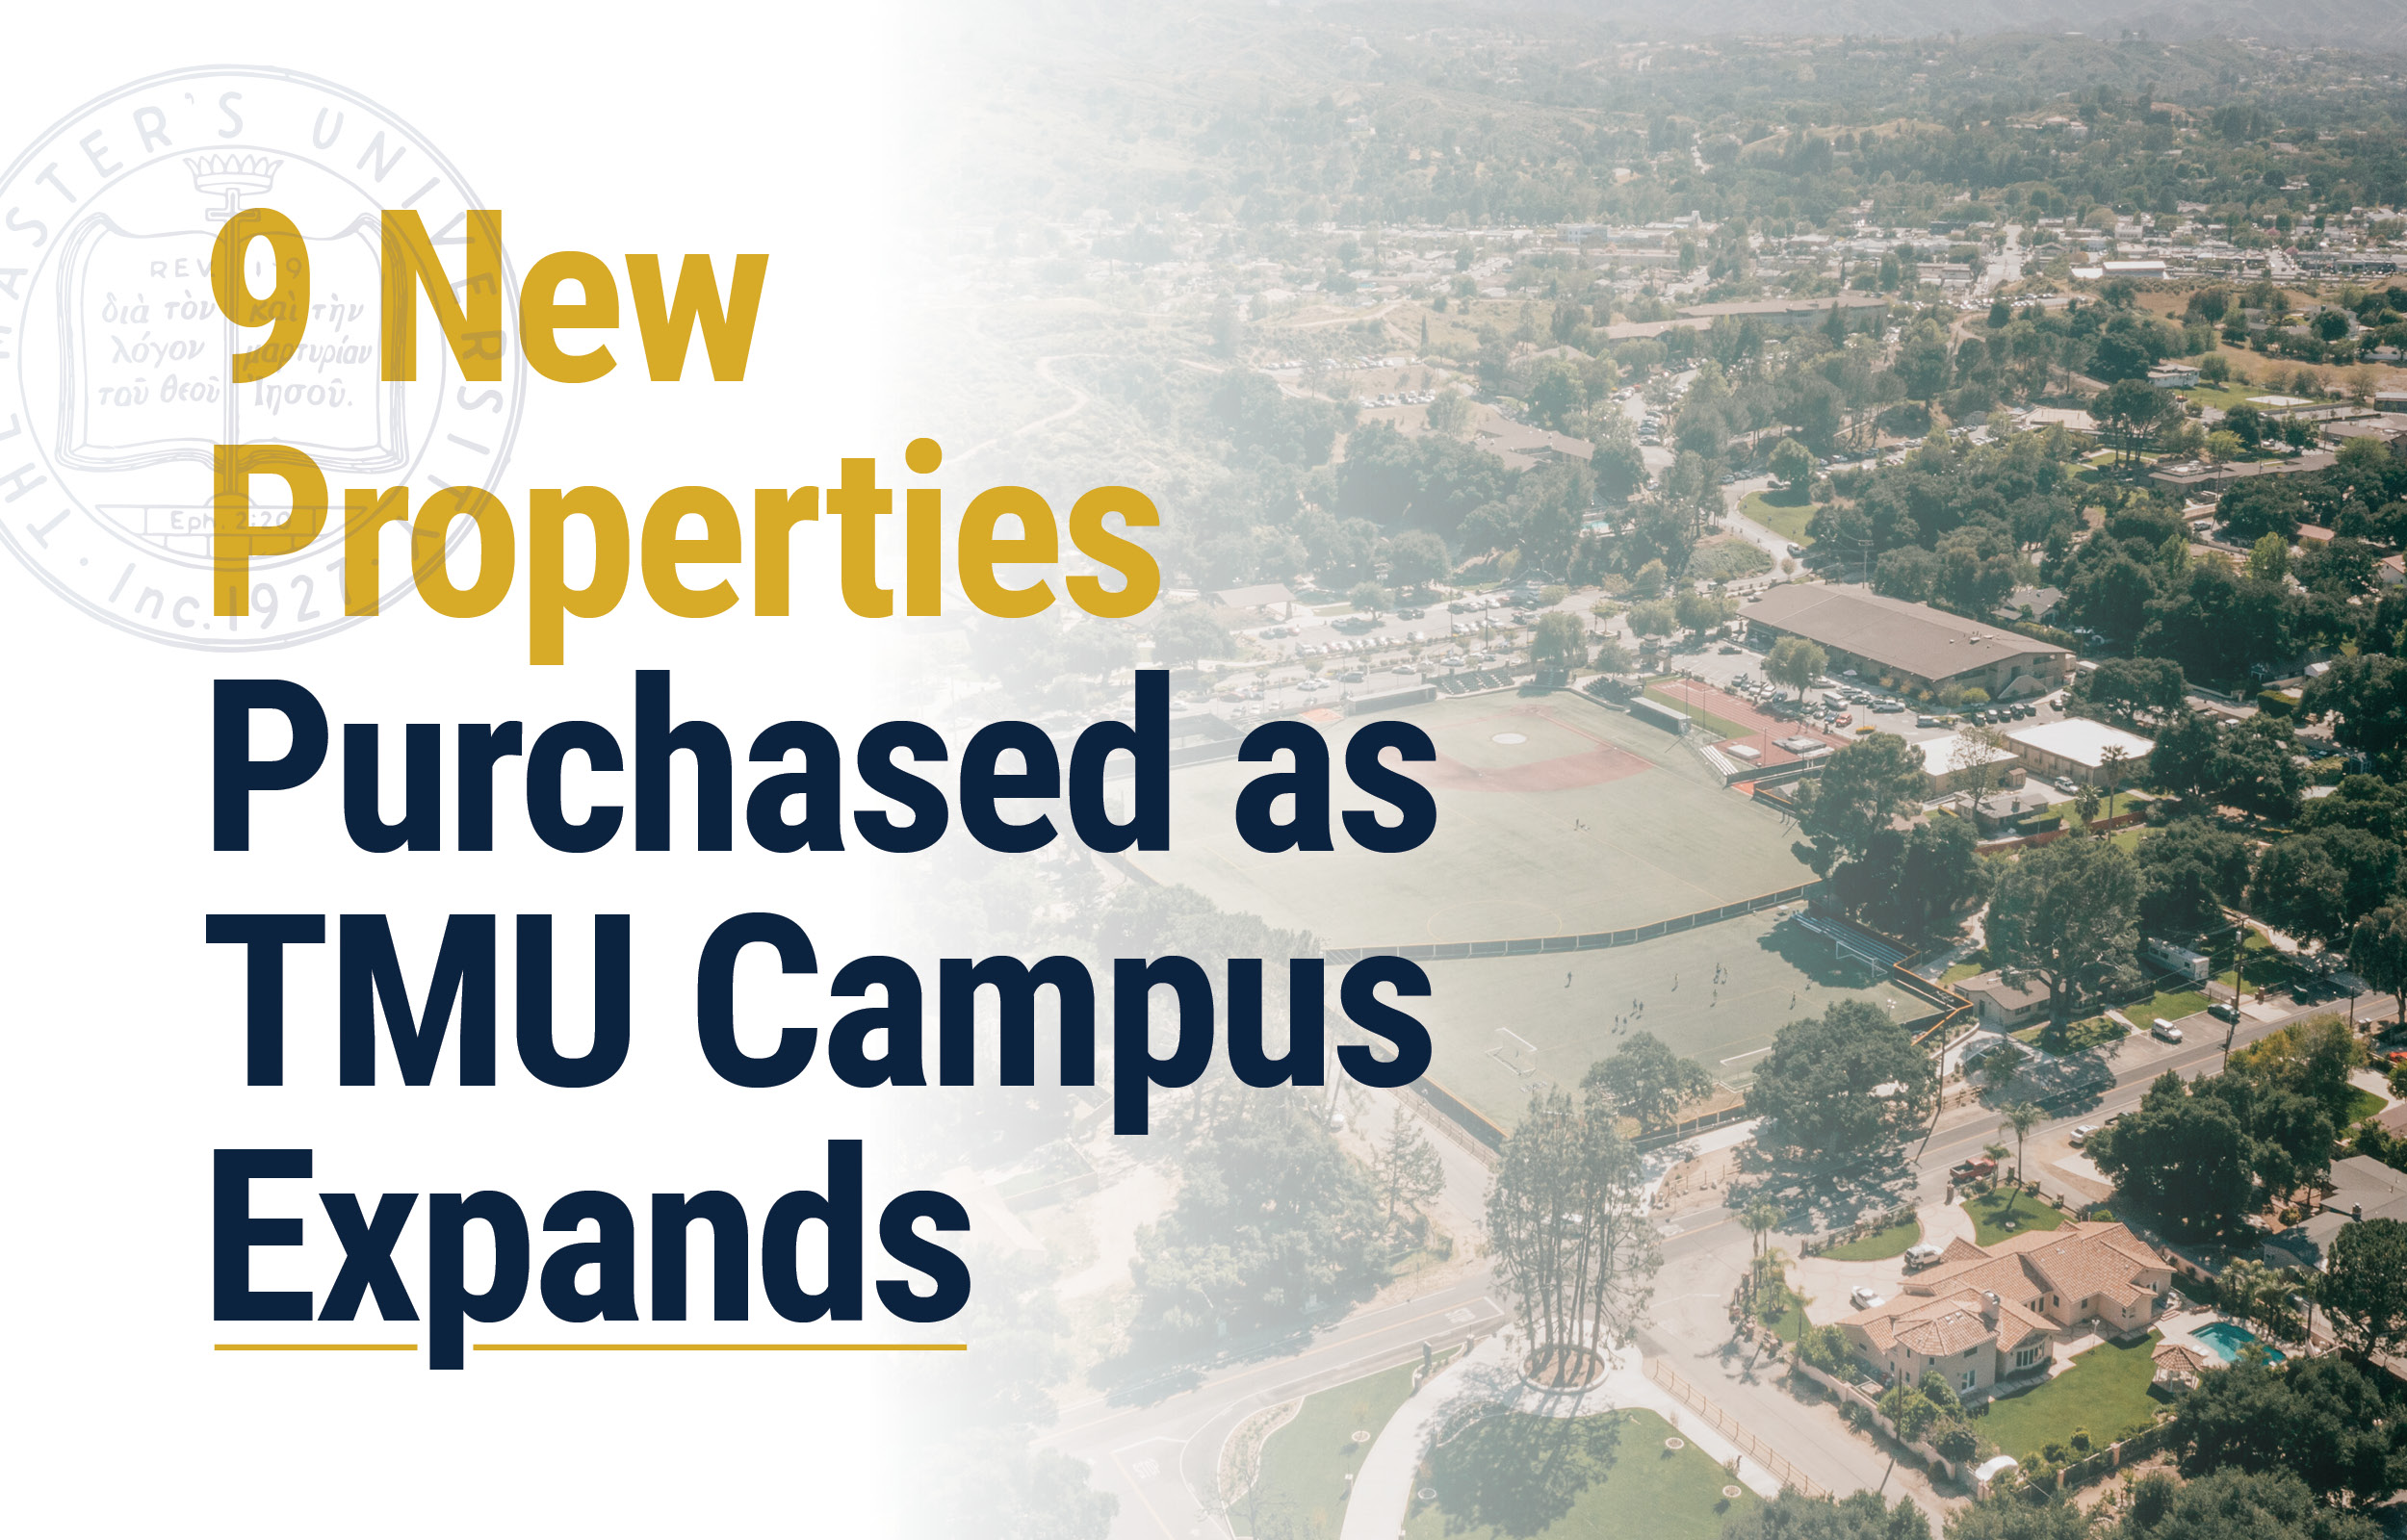 TMU Campus Expands With Purchase of 9 New Properties